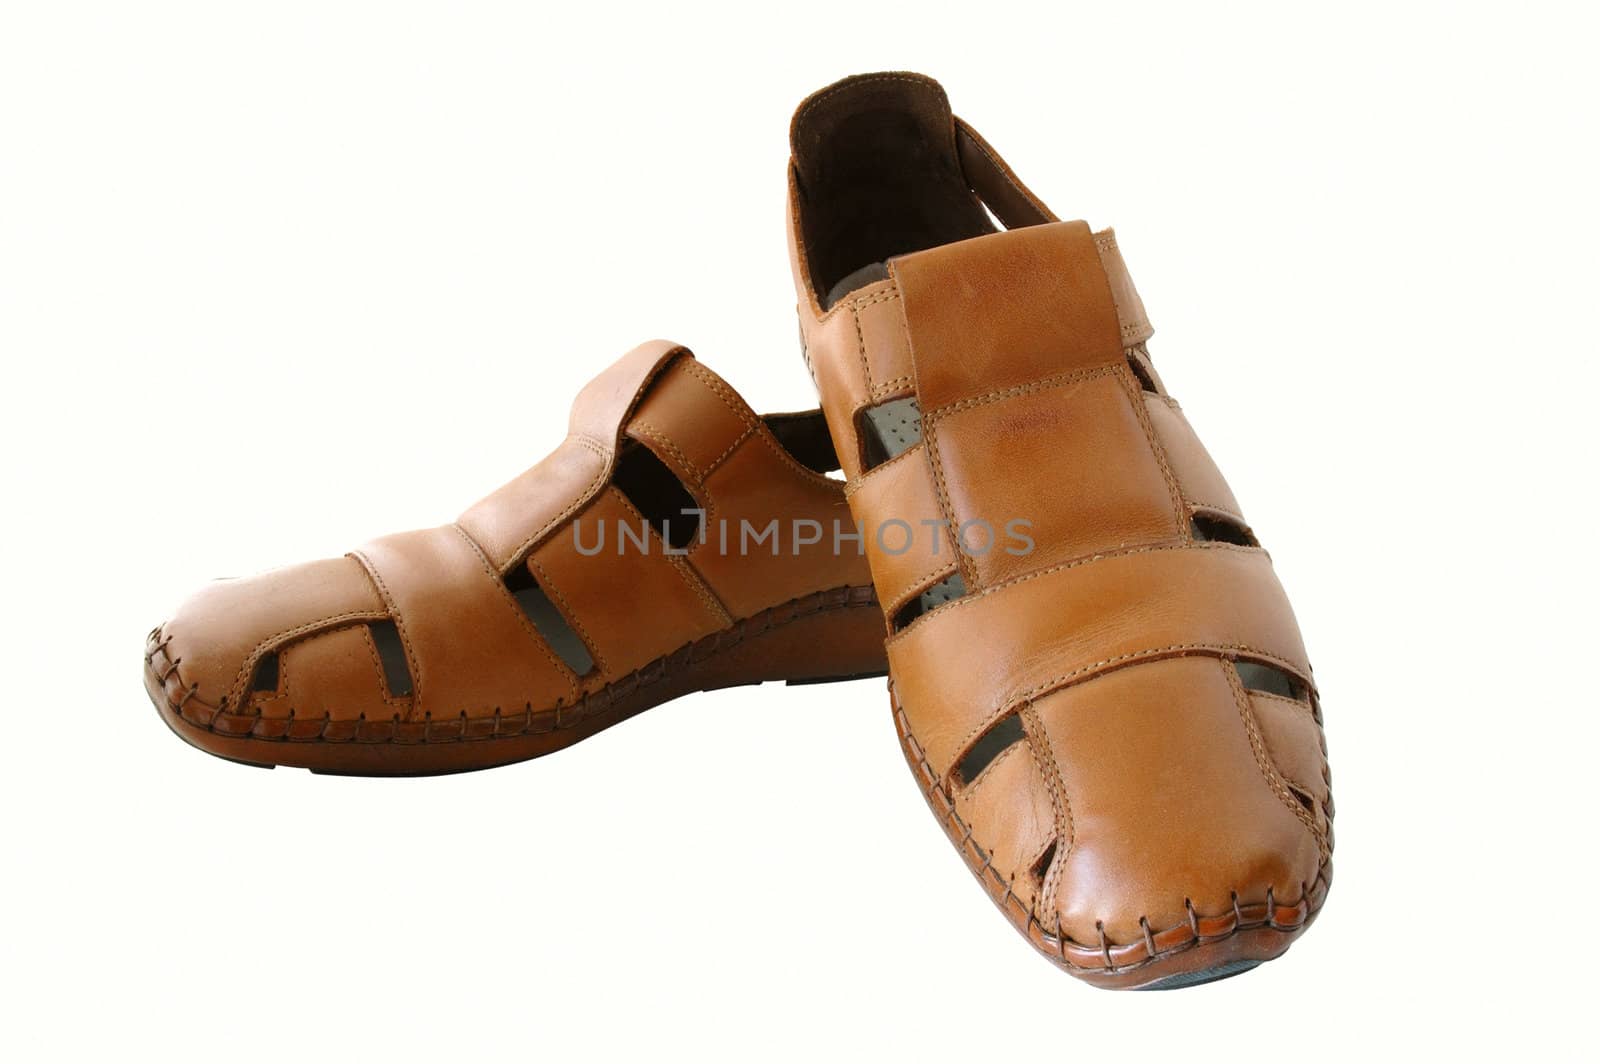 Man's summer leather brown shoes (sandals or mocassins).